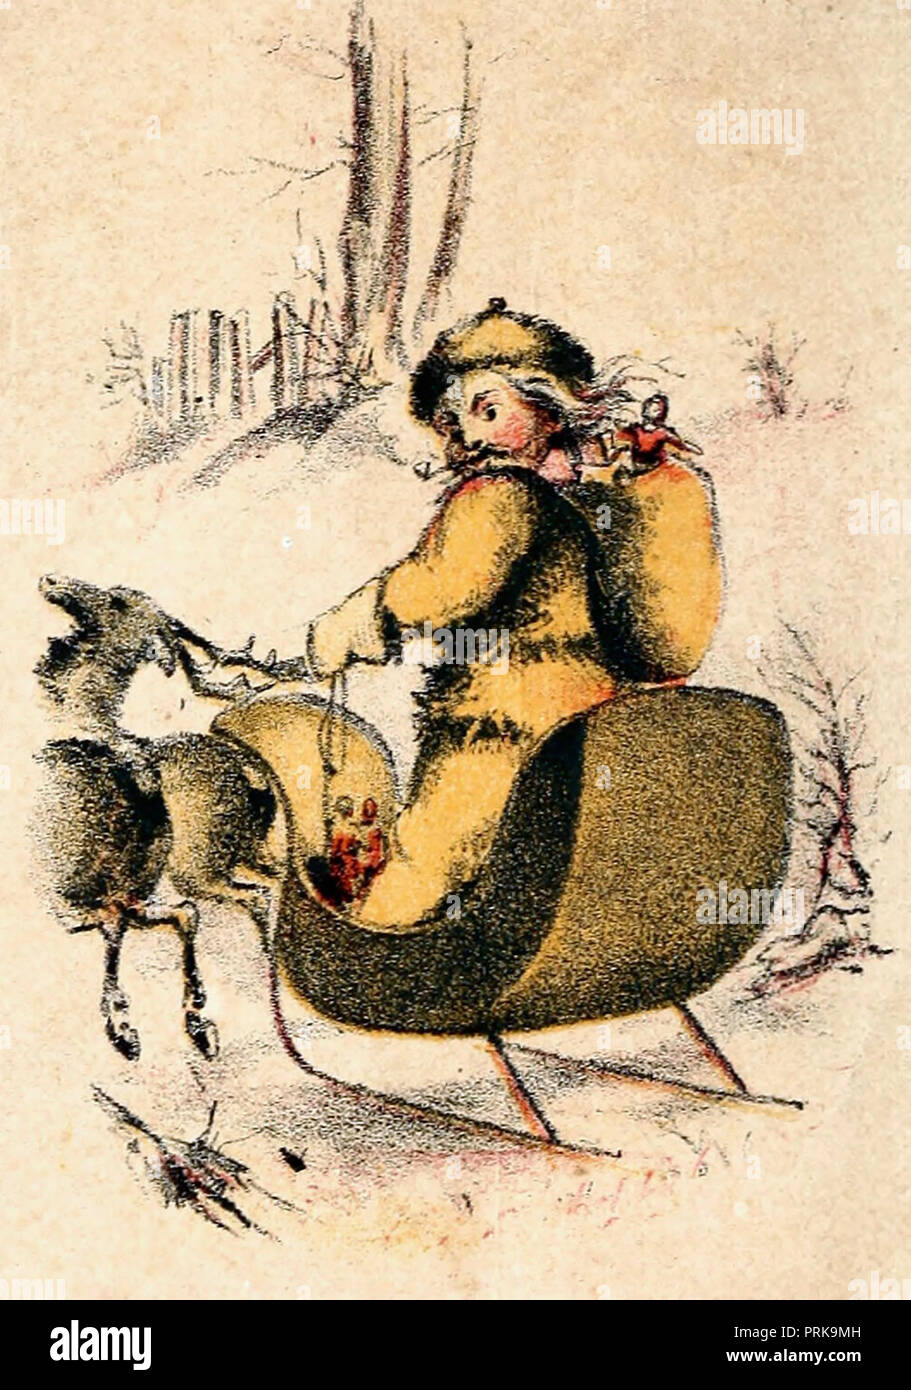 Santa Claus on his sleigh with reindeer pulling Stock Photo